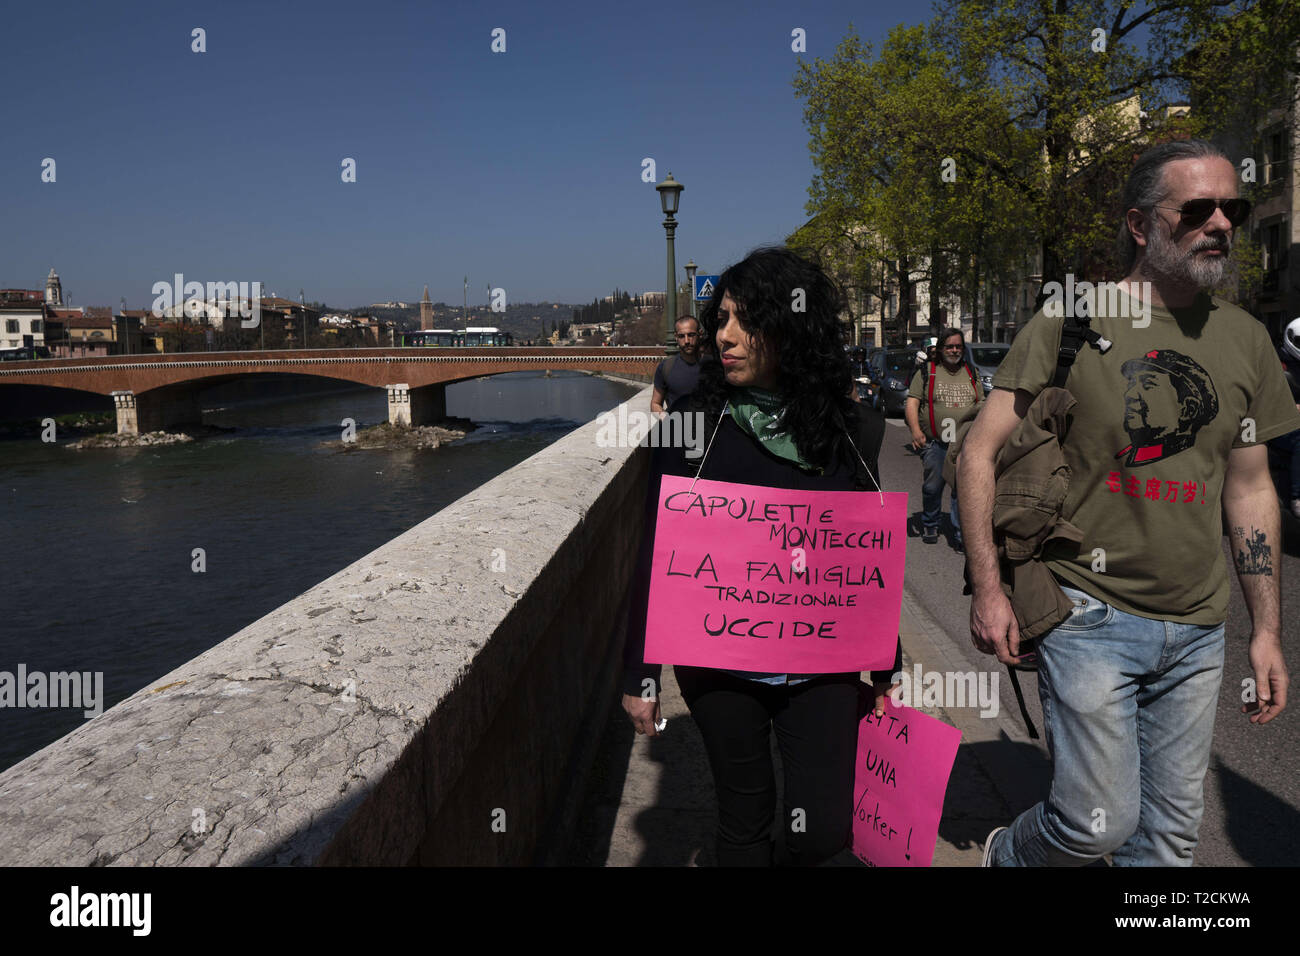 Verona, Veneto, Italy. 30th Mar, 2019. A woman seen moving with placards.The Italian Women organization Non Una di Meno called for a march against the thirteenth 'World Congress of Families'' (WCF) in Verona. The WCF gathers several representatives of 'pro-life movements'' in Europe and abroad, personalities from the religious world against abortion and it's reportedly connected to far-rights movements. Non Una di Meno and other associations protest against the WCF's positions against abortion, homosexuality and their aims to write a global agenda and politics on these matters. ( Stock Photo